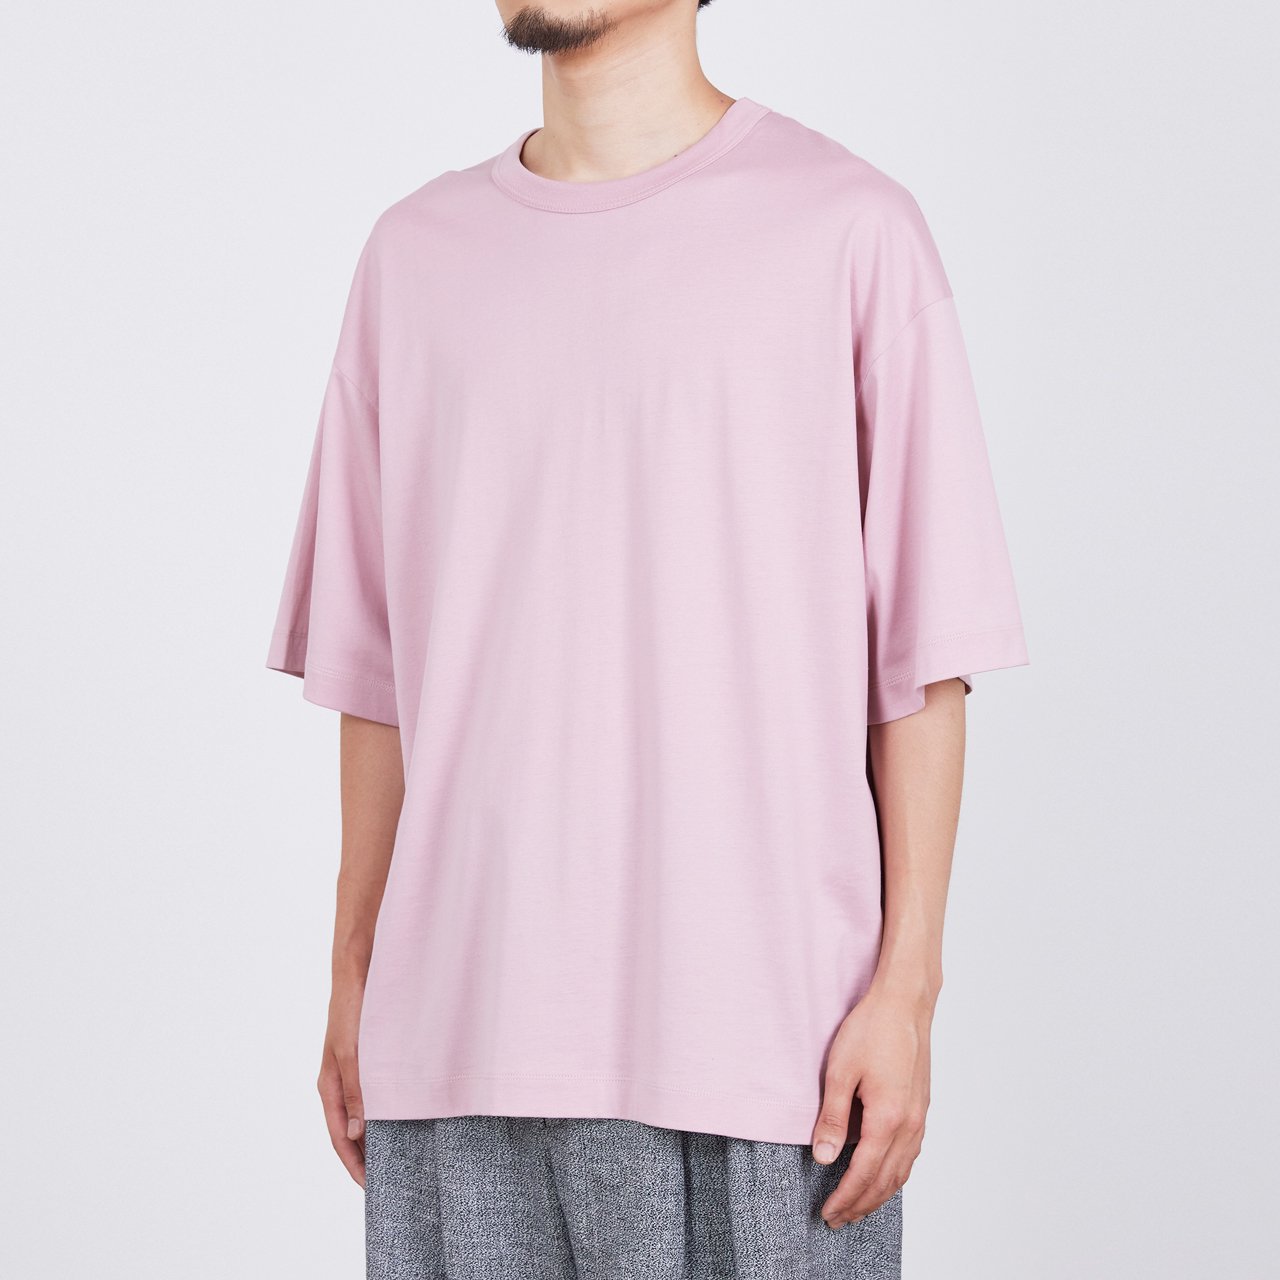 <img class='new_mark_img1' src='https://img.shop-pro.jp/img/new/icons5.gif' style='border:none;display:inline;margin:0px;padding:0px;width:auto;' />MARKAWARE (ޡ)COMFORT FIT Tee PINK -ORGANIC GIZA 80/2 KNIT-